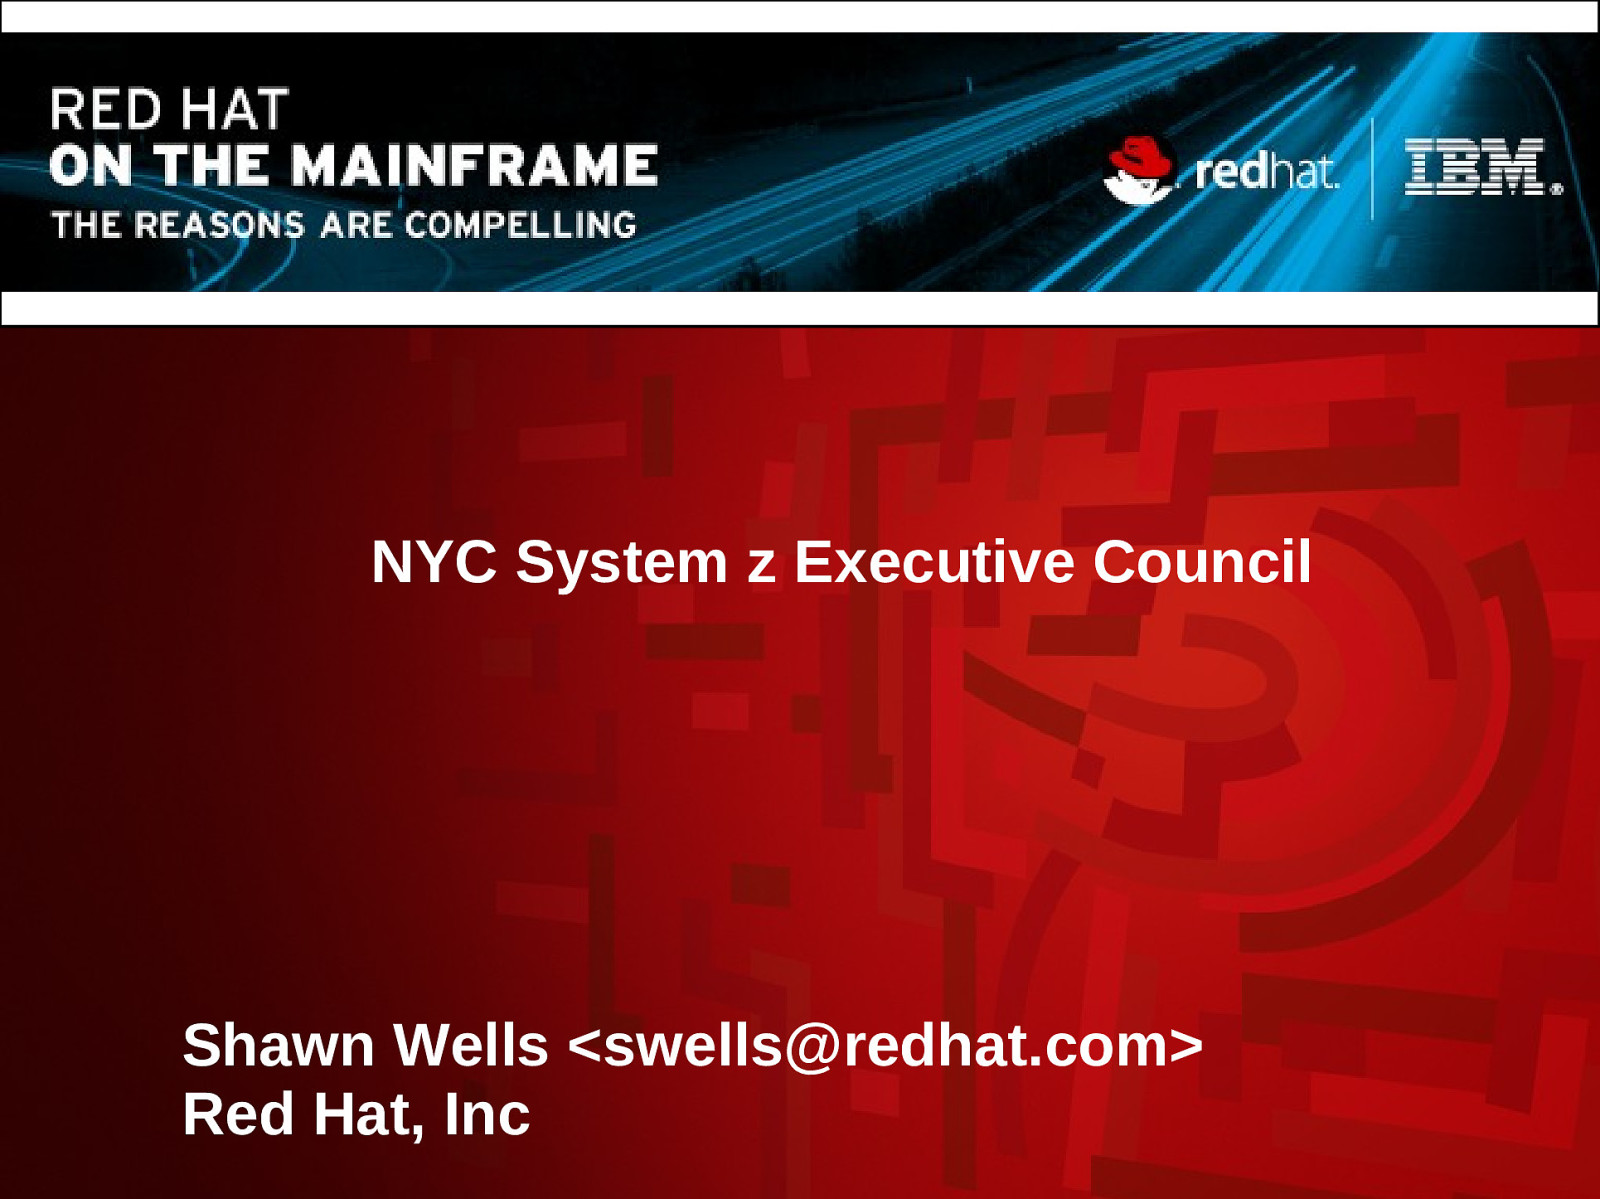 Red Hat on the Mainframe: The Reasons Are Compelling